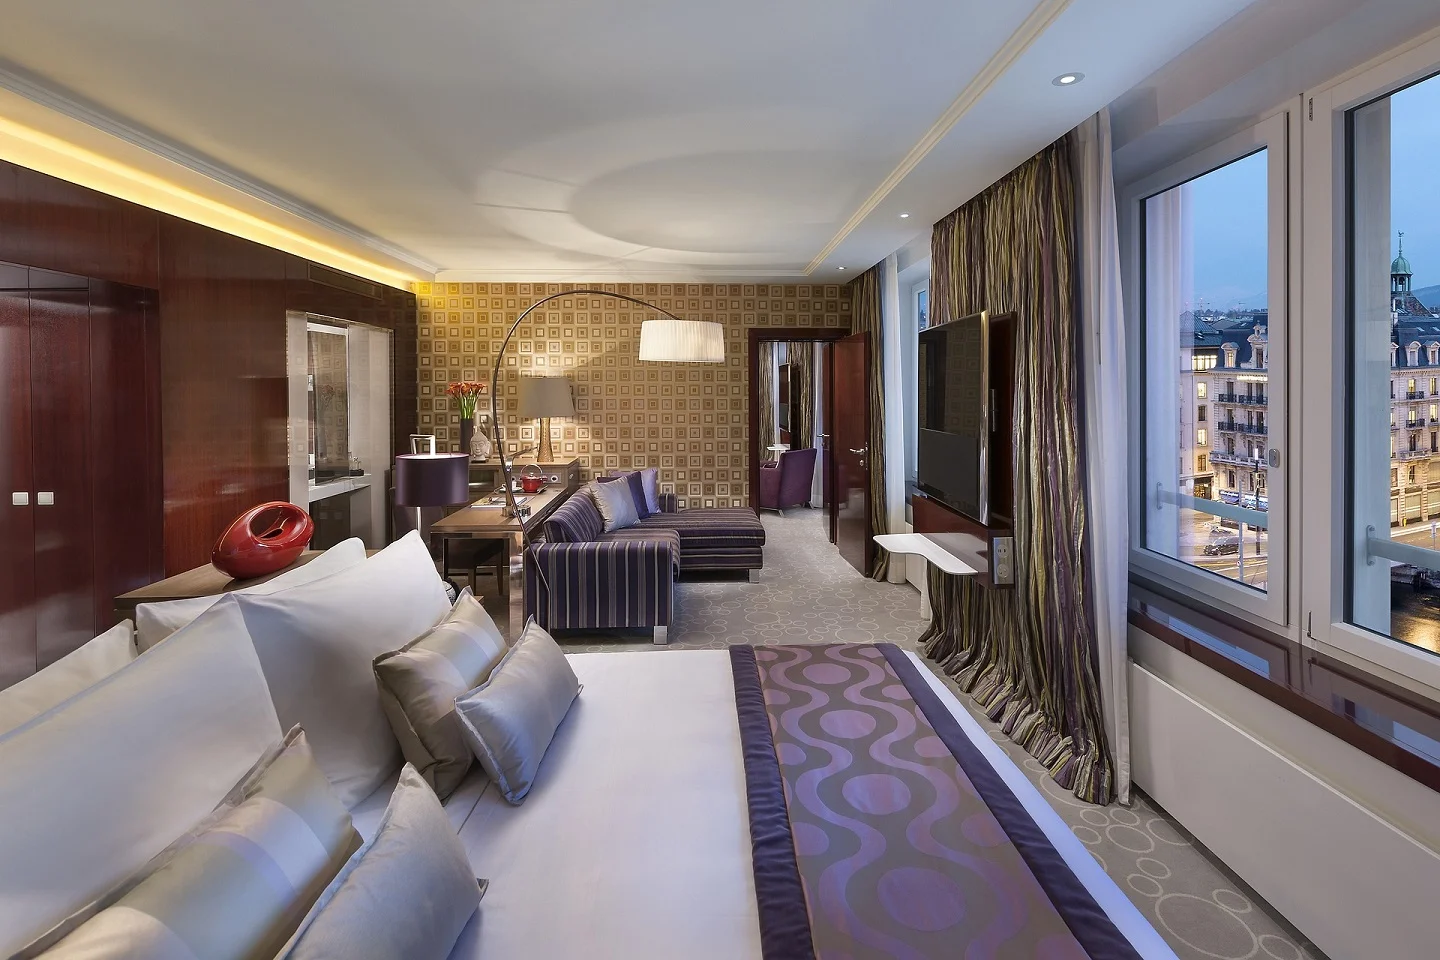 Hilton Brand Expands into Delhi‑NCR, signs New Hotel